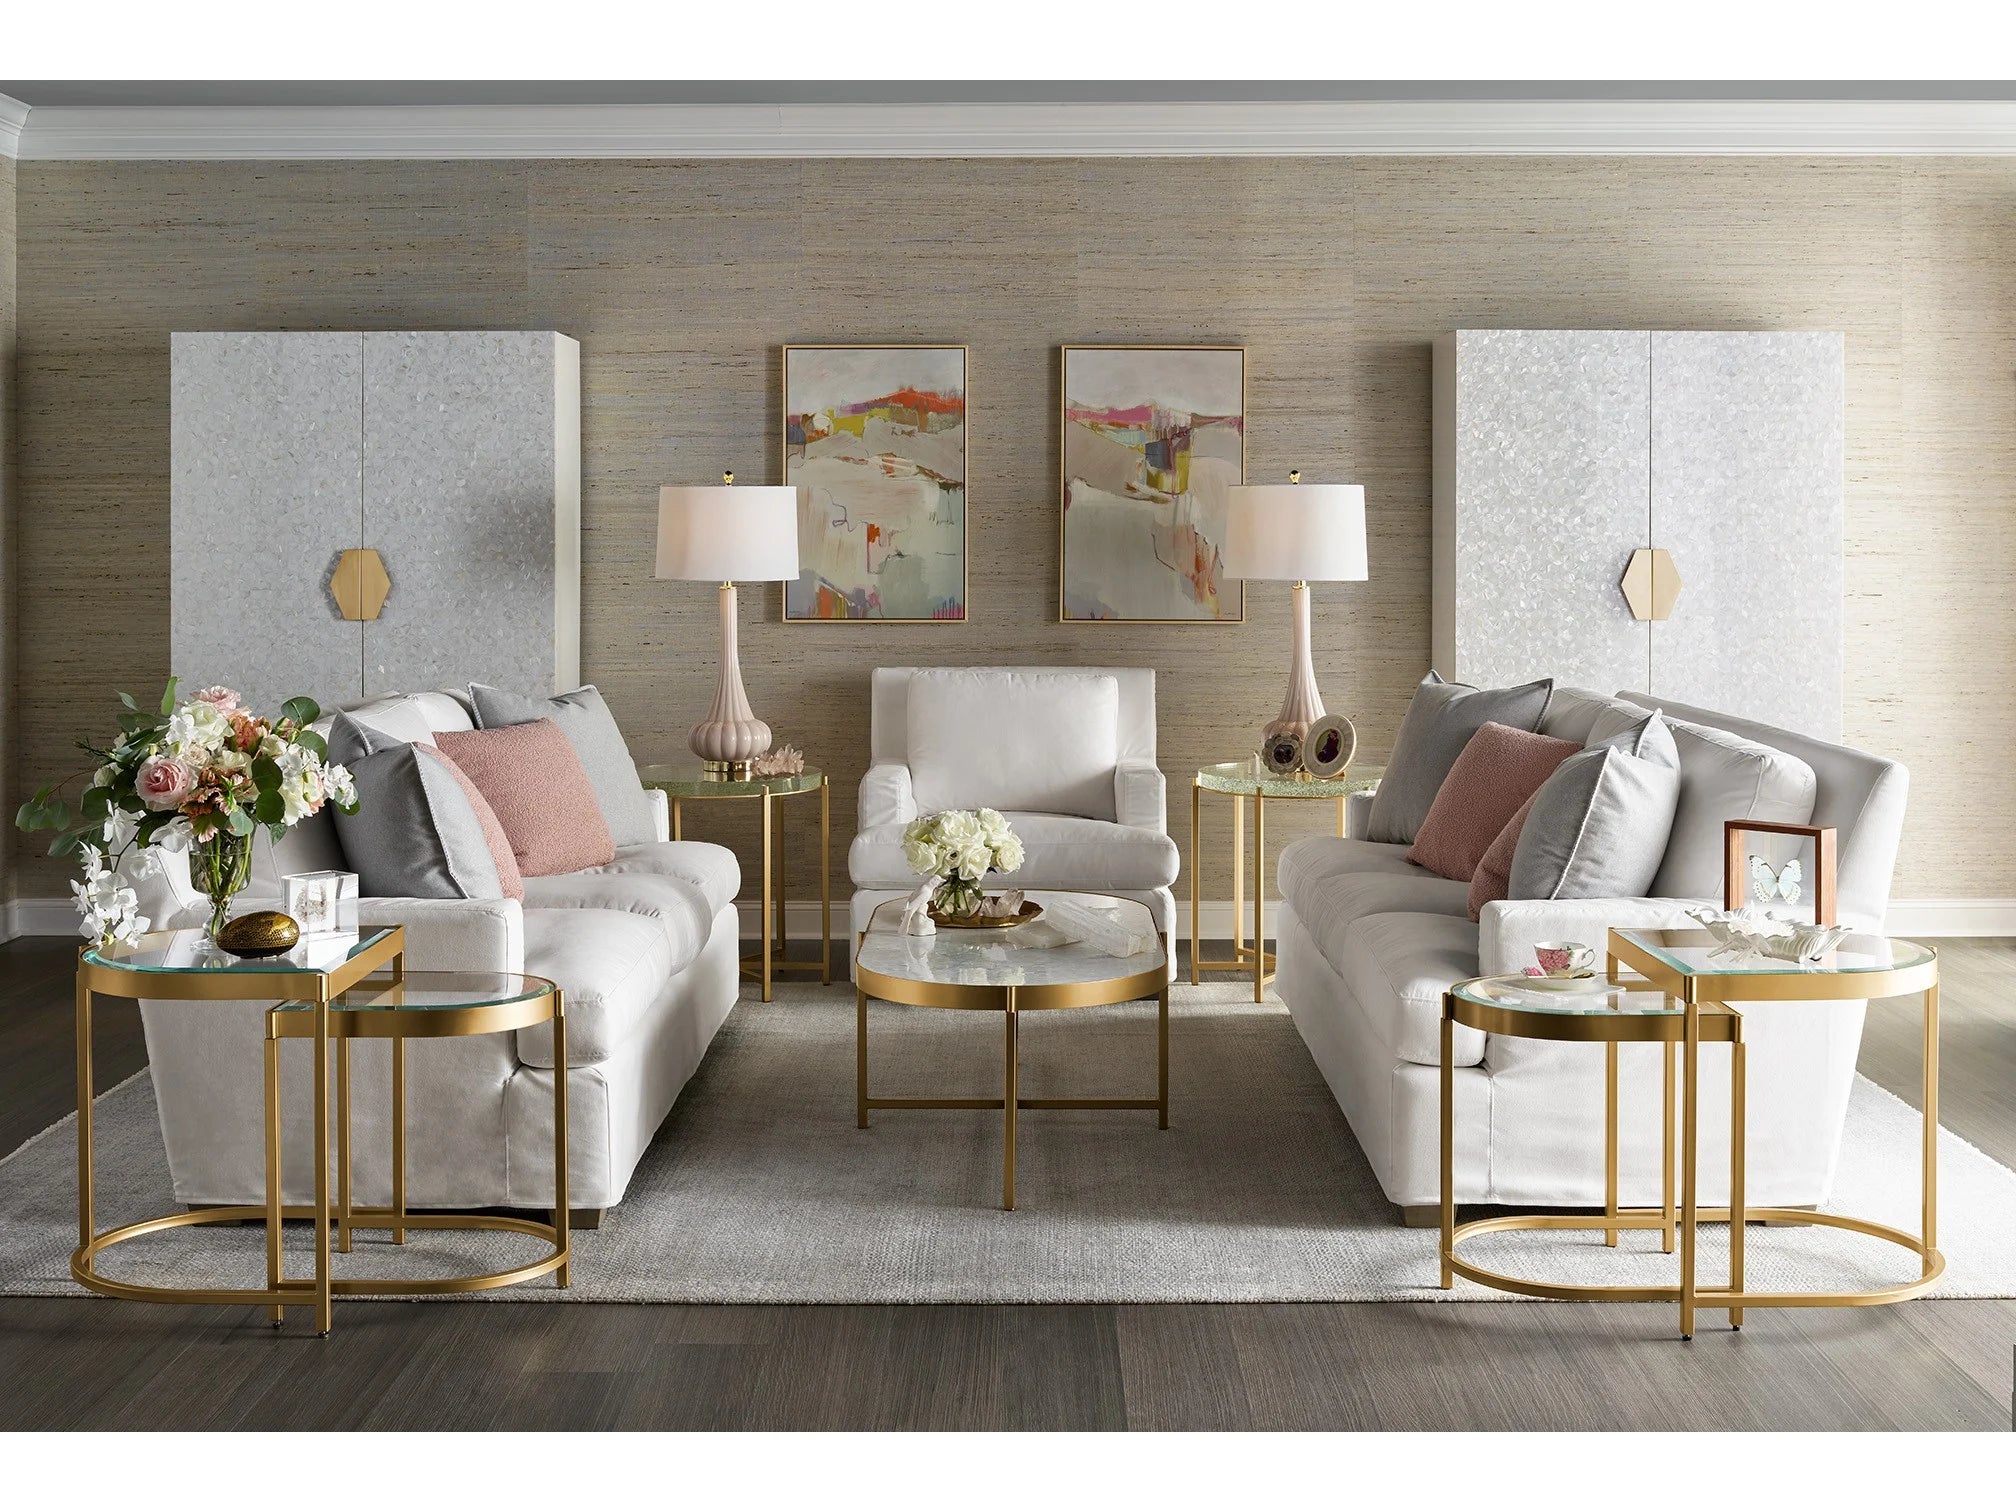 Editorial End Tables by Miranda Kerr Home